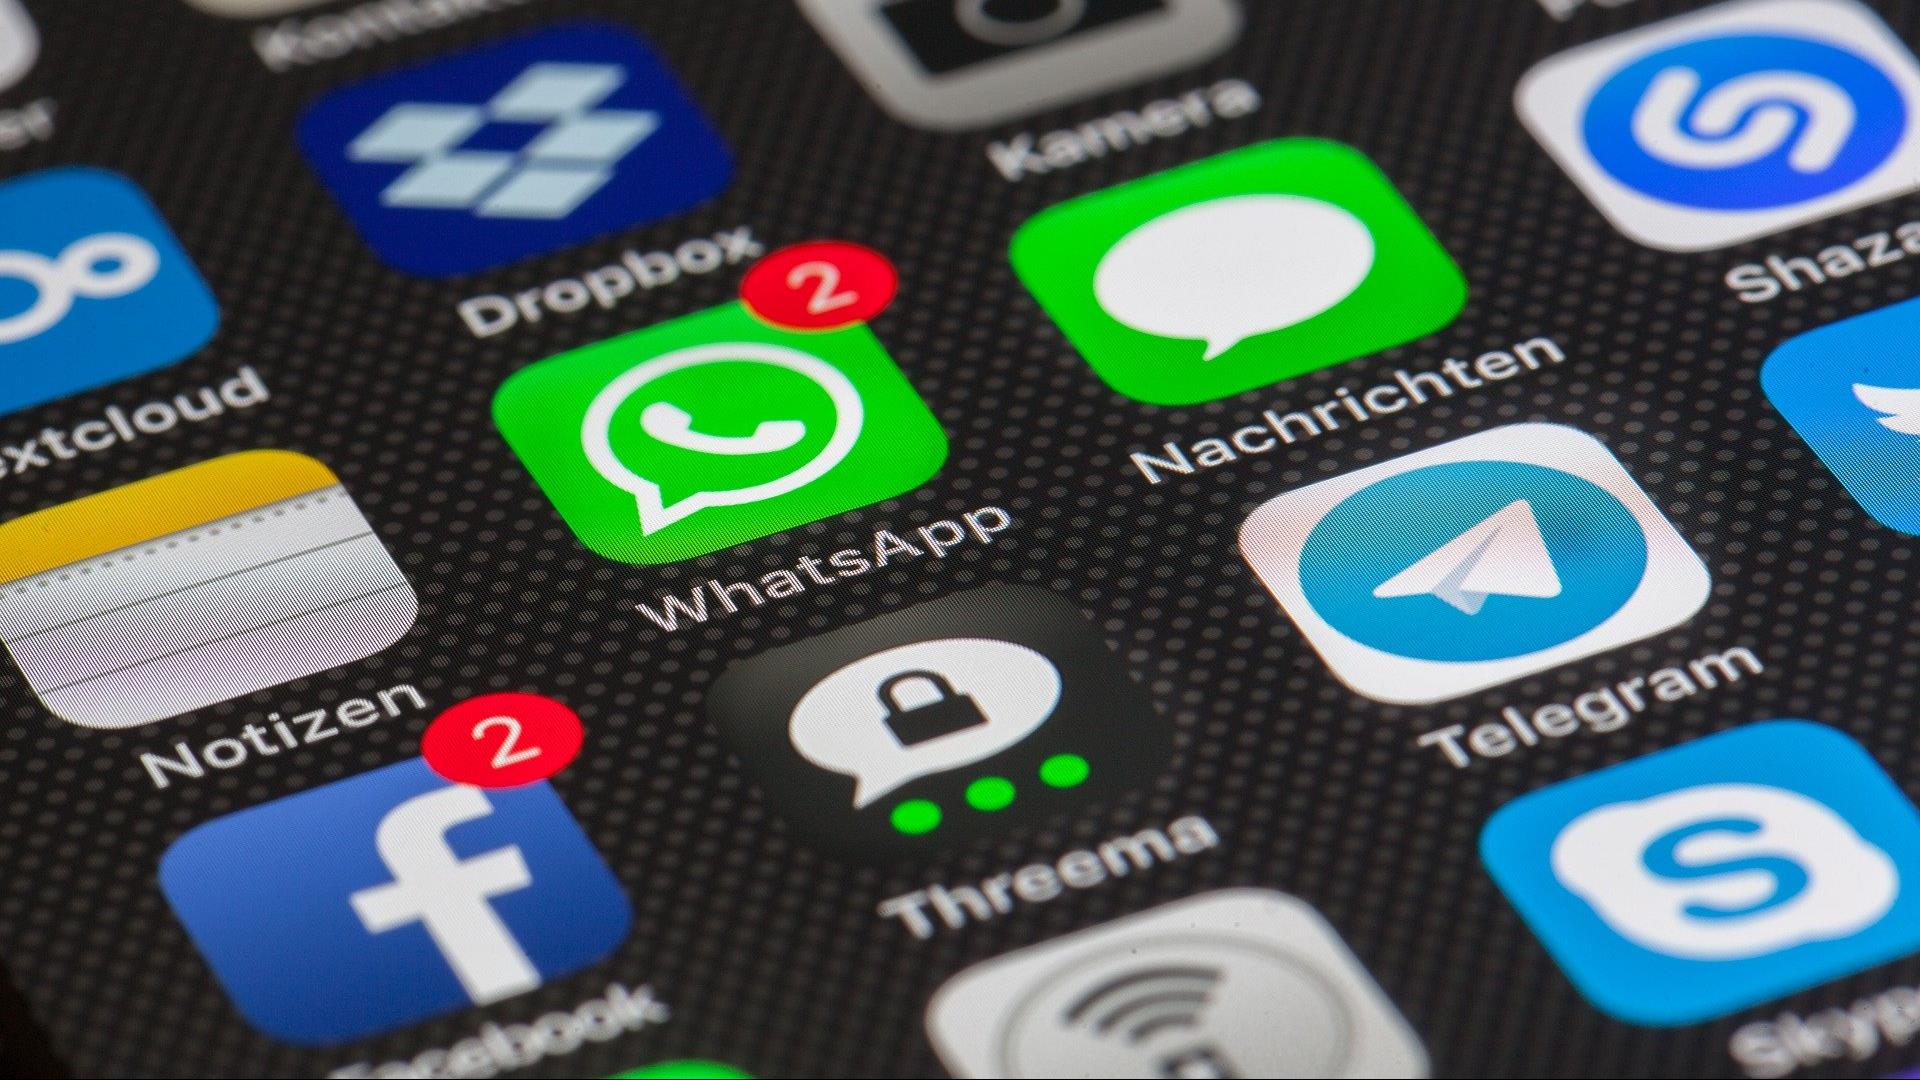 WhatsApp can exclude those who do not share their data with it